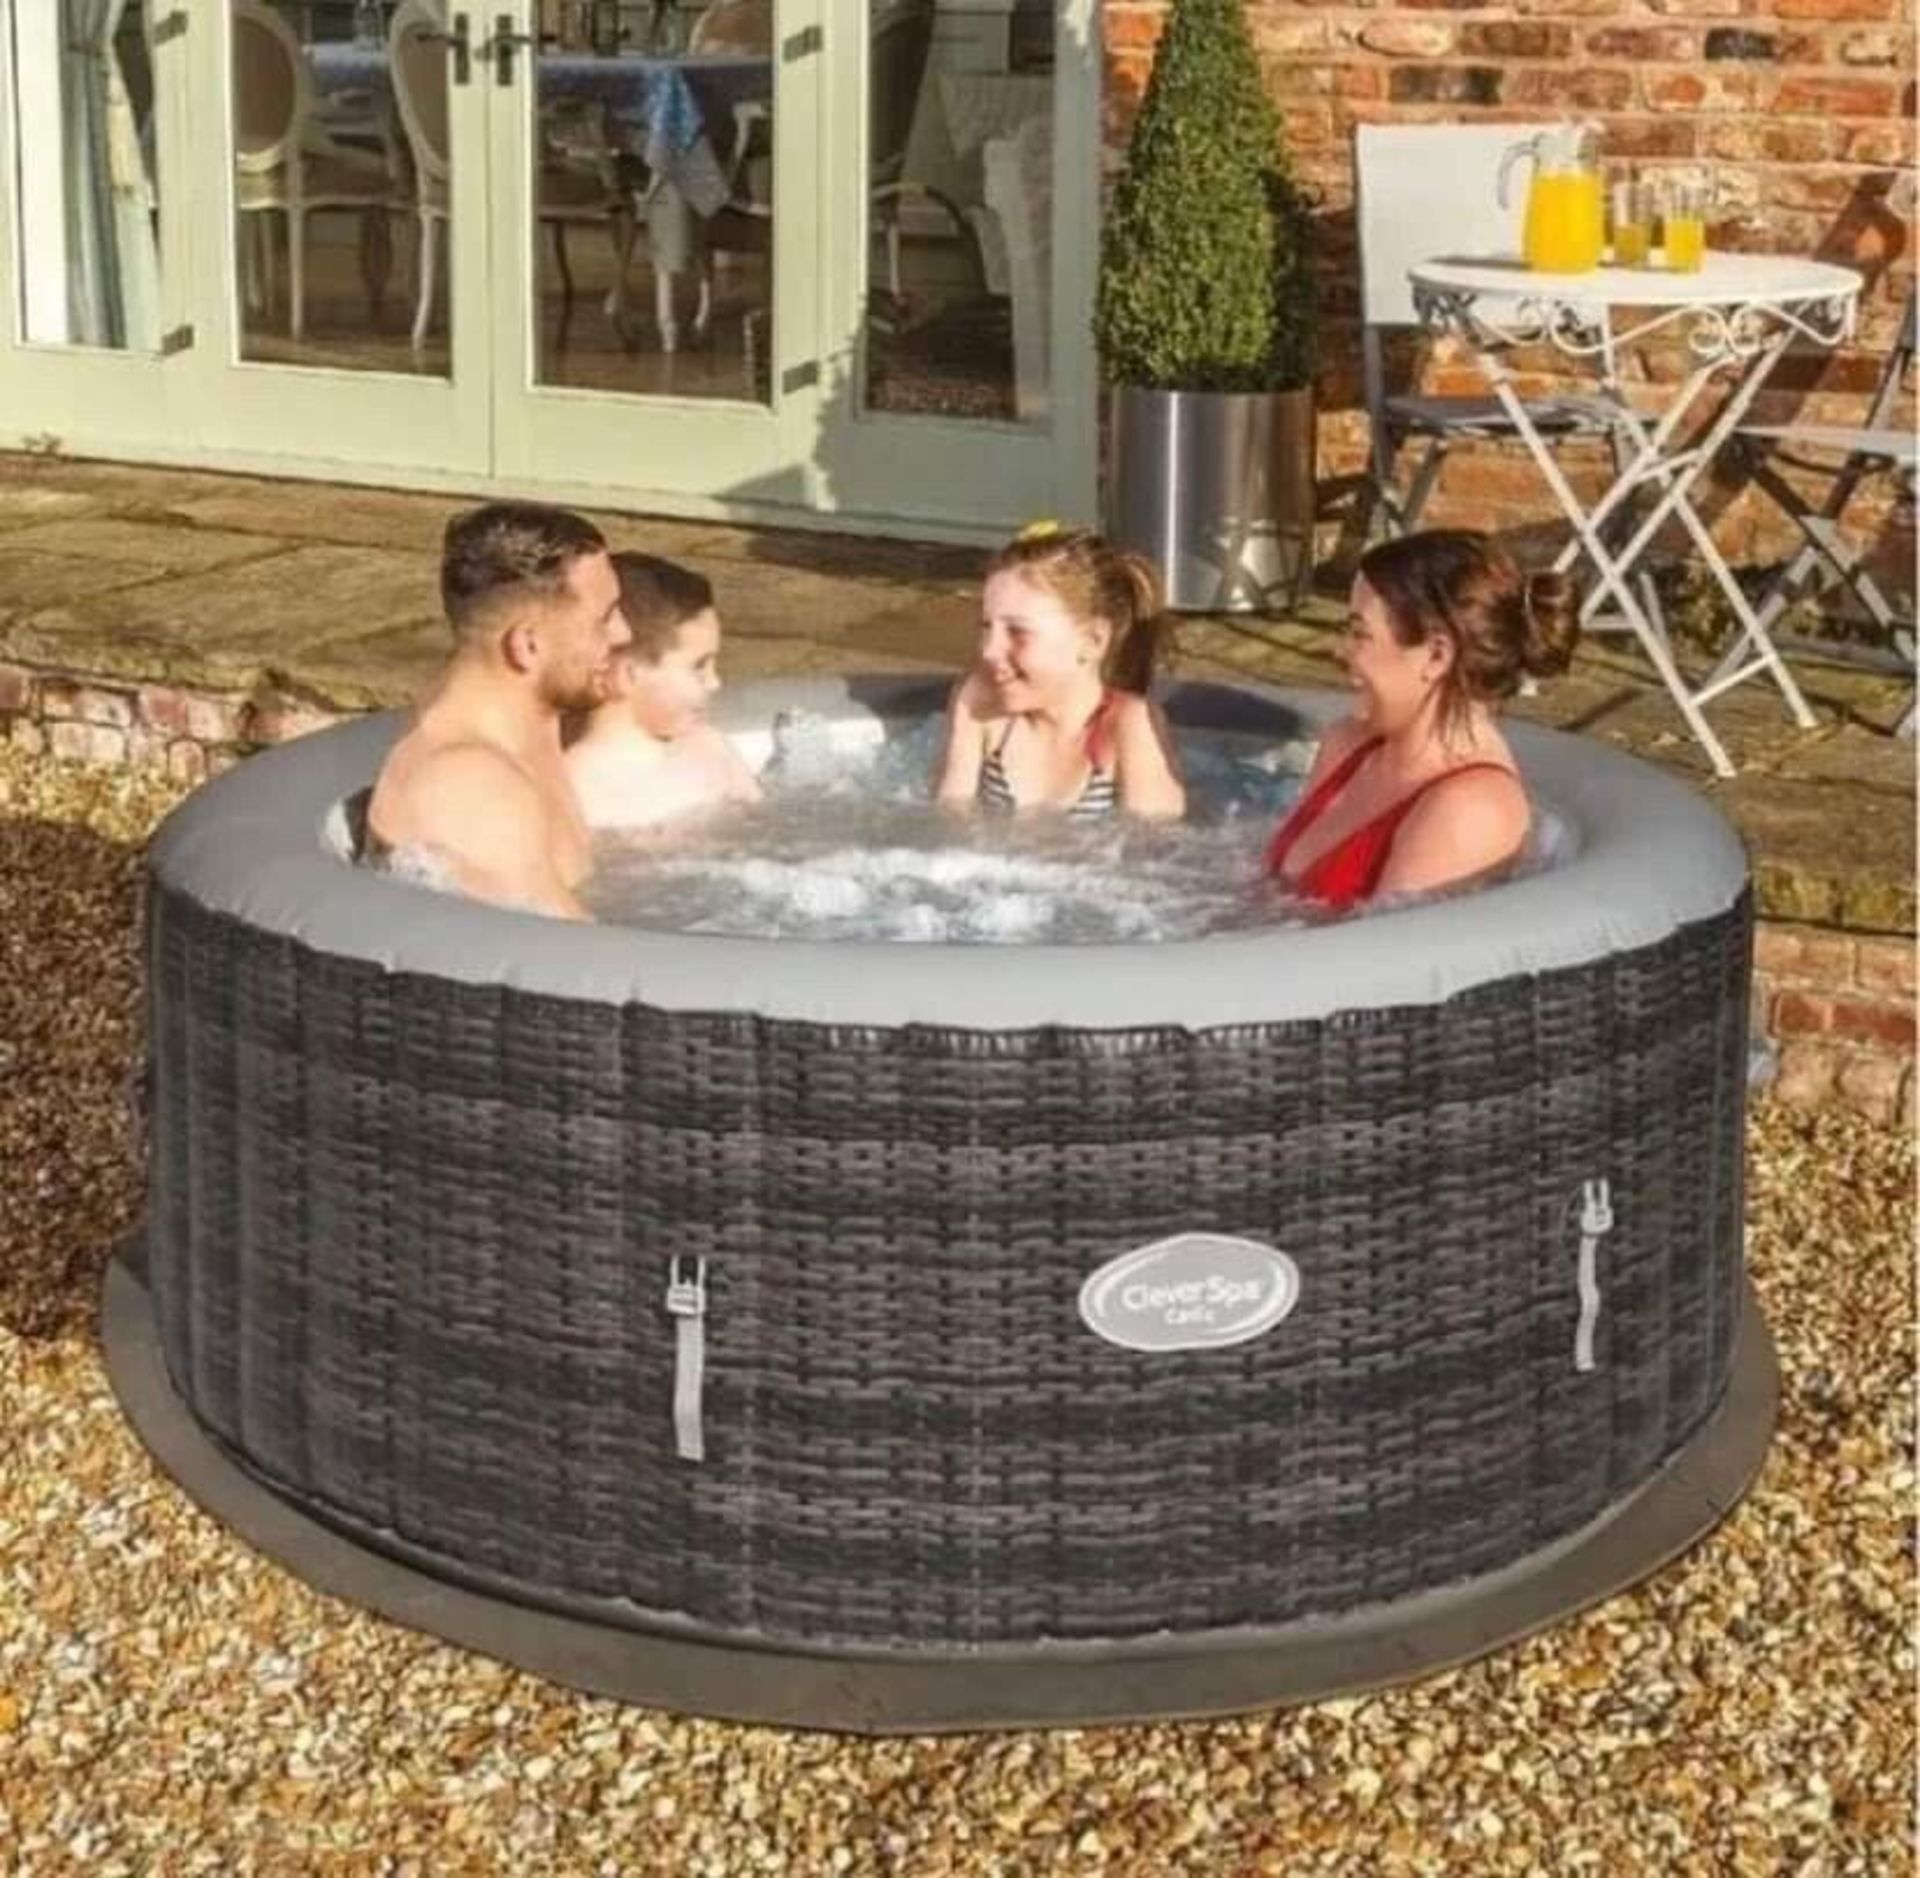 NEW CATIZ 4 PERSON JACUZZI - BUILT IN PUMP AND HEATER - 110 AIR JETS - INFLATES IN 5 MINUTES - Image 2 of 2